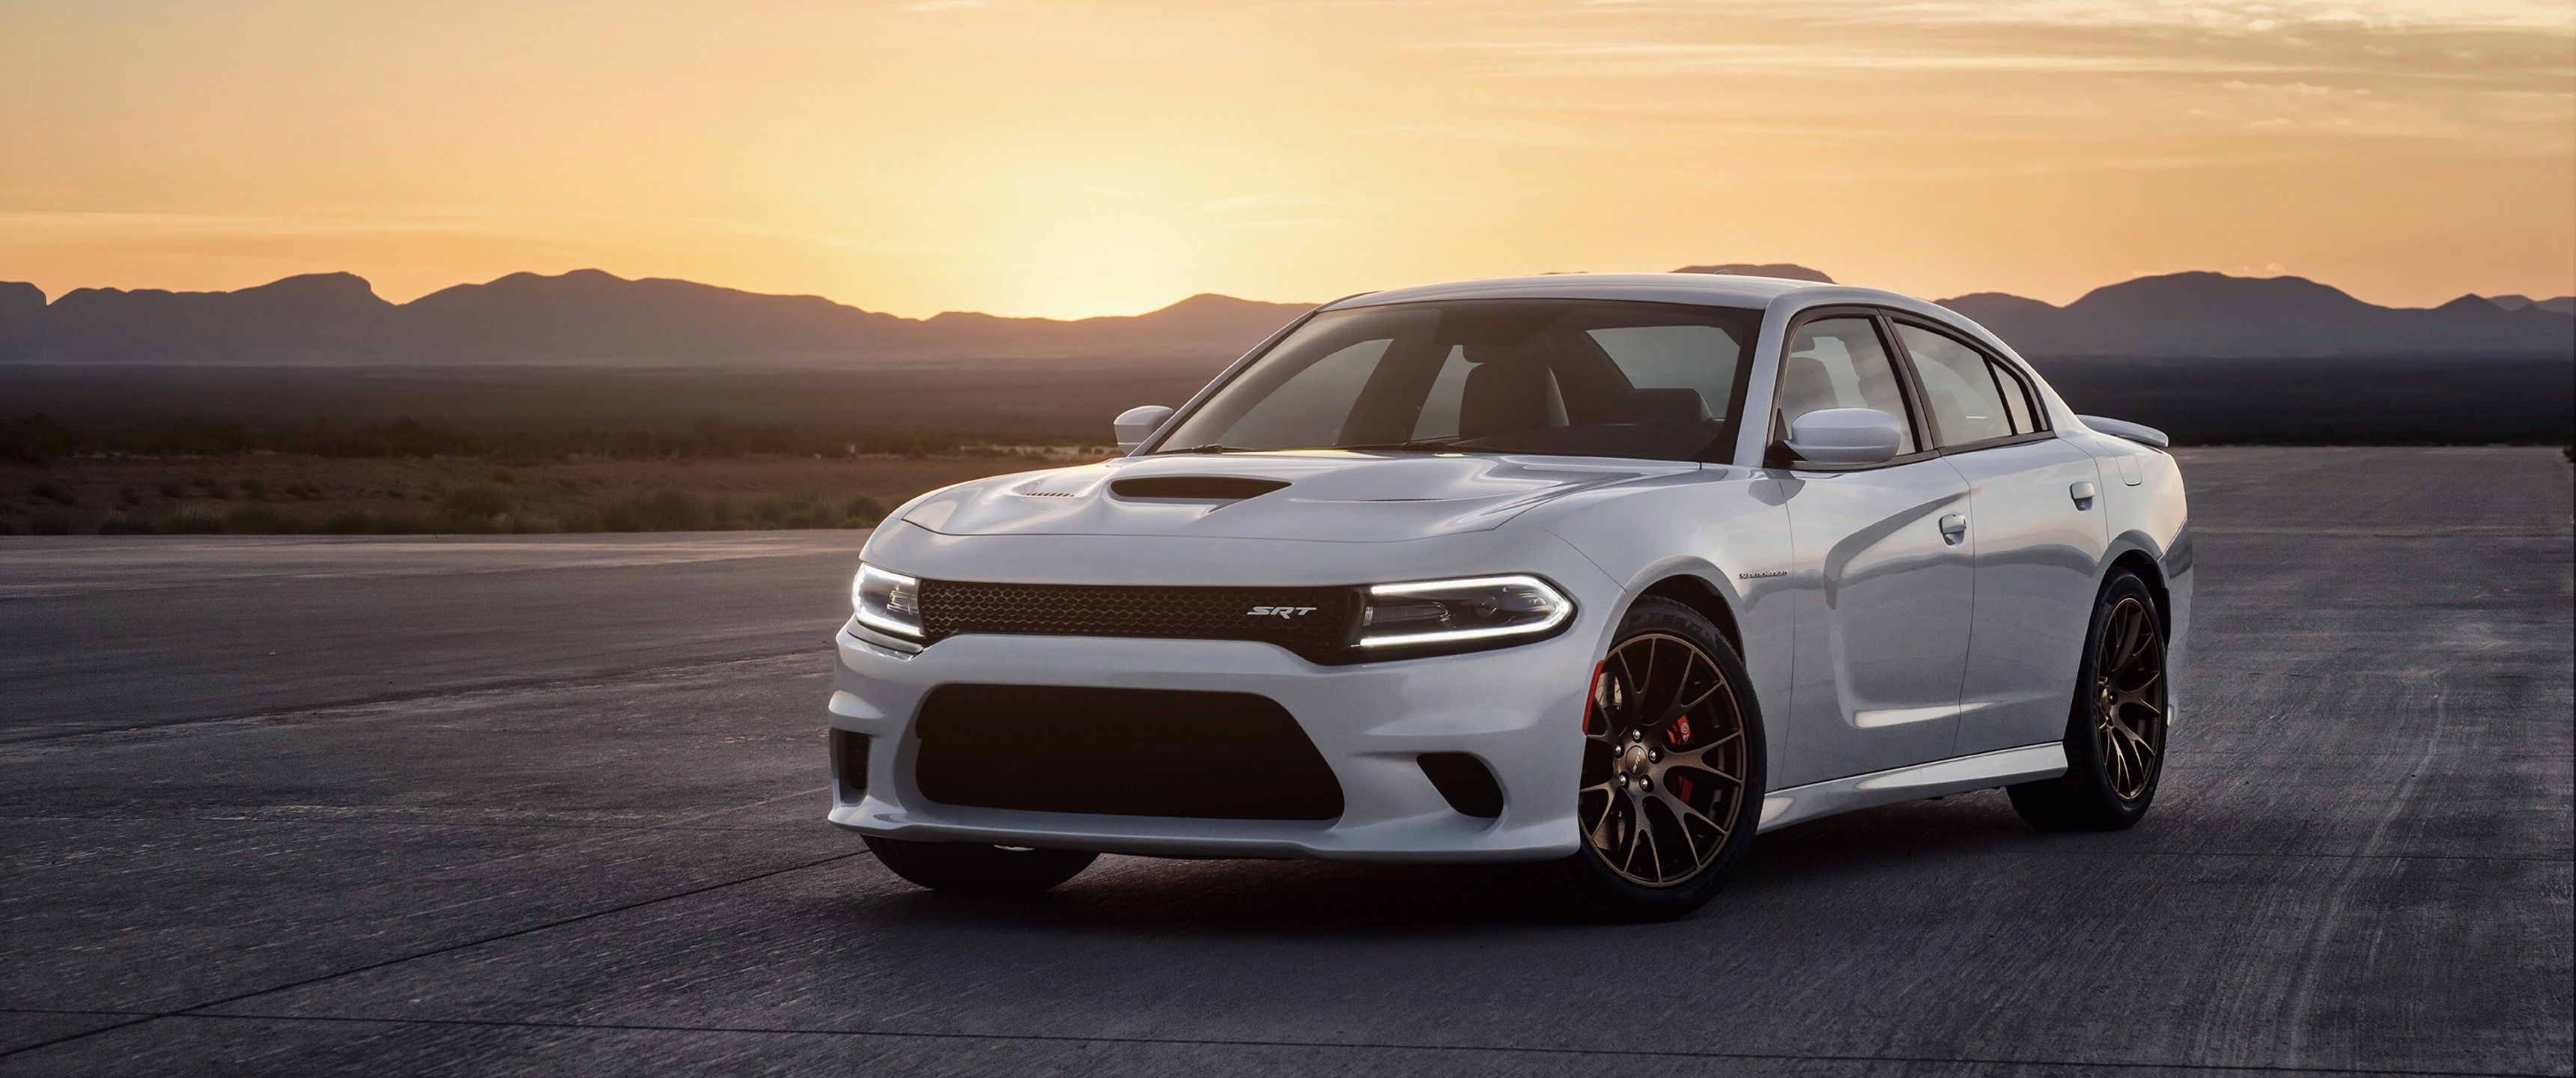 Dodge Charger Background. Dodge Charger